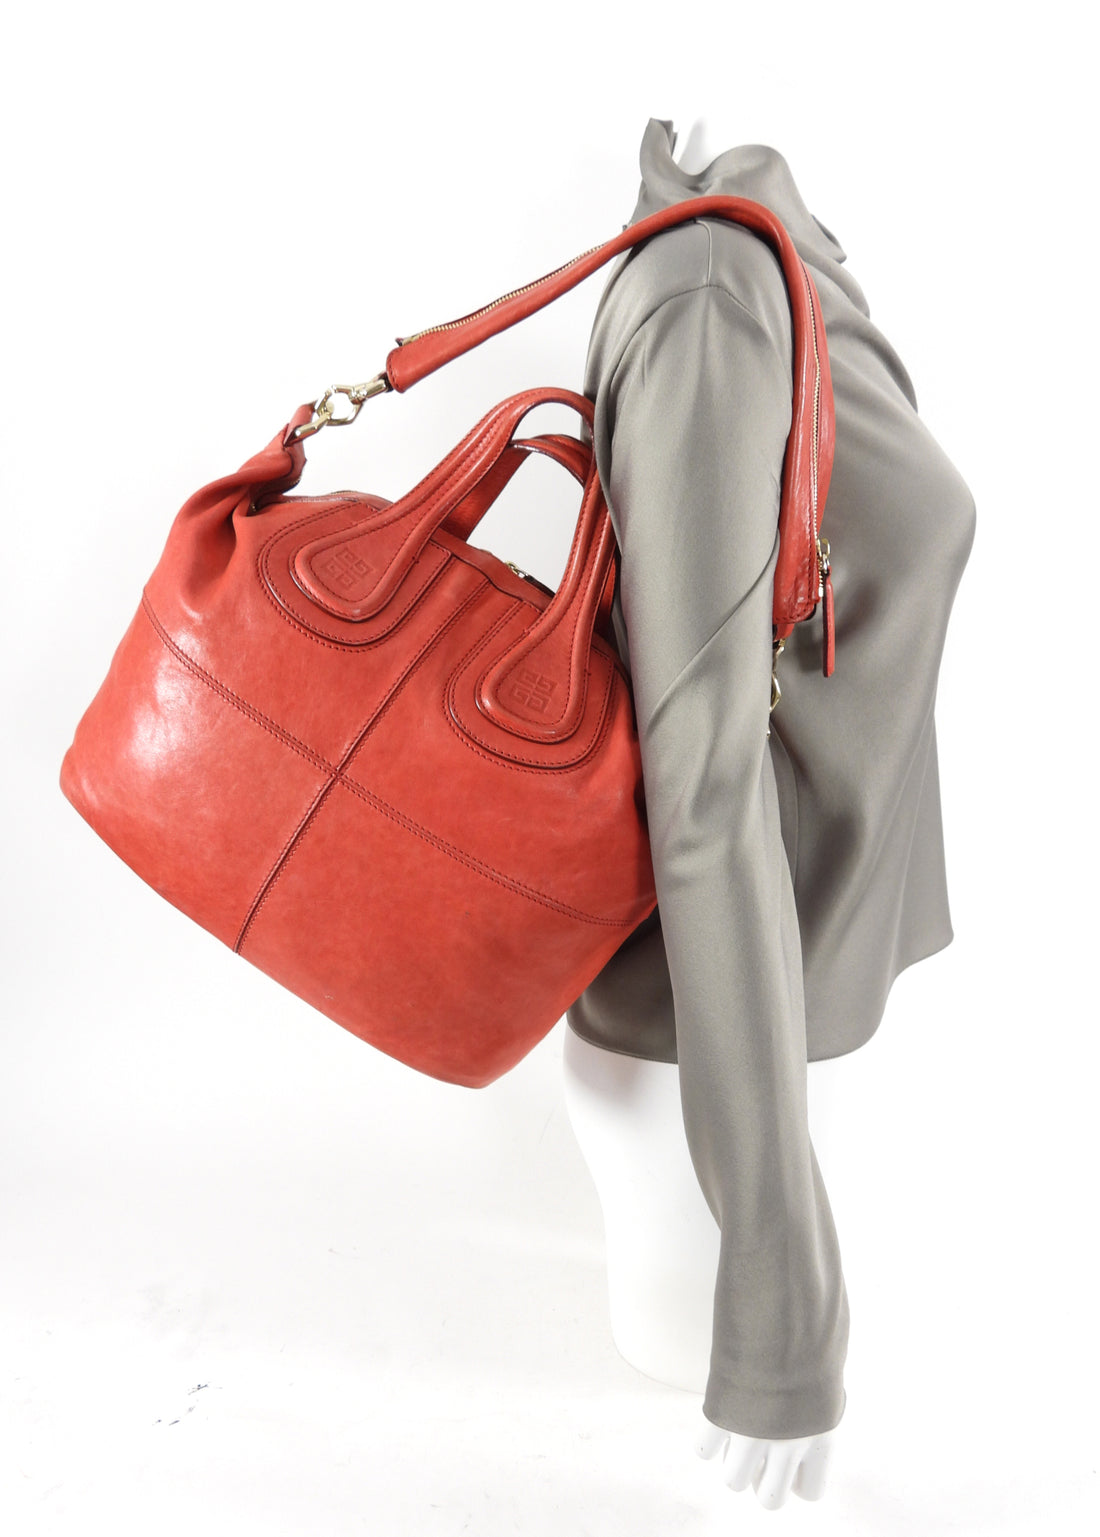 Givenchy Nightingale Red Leather Bag